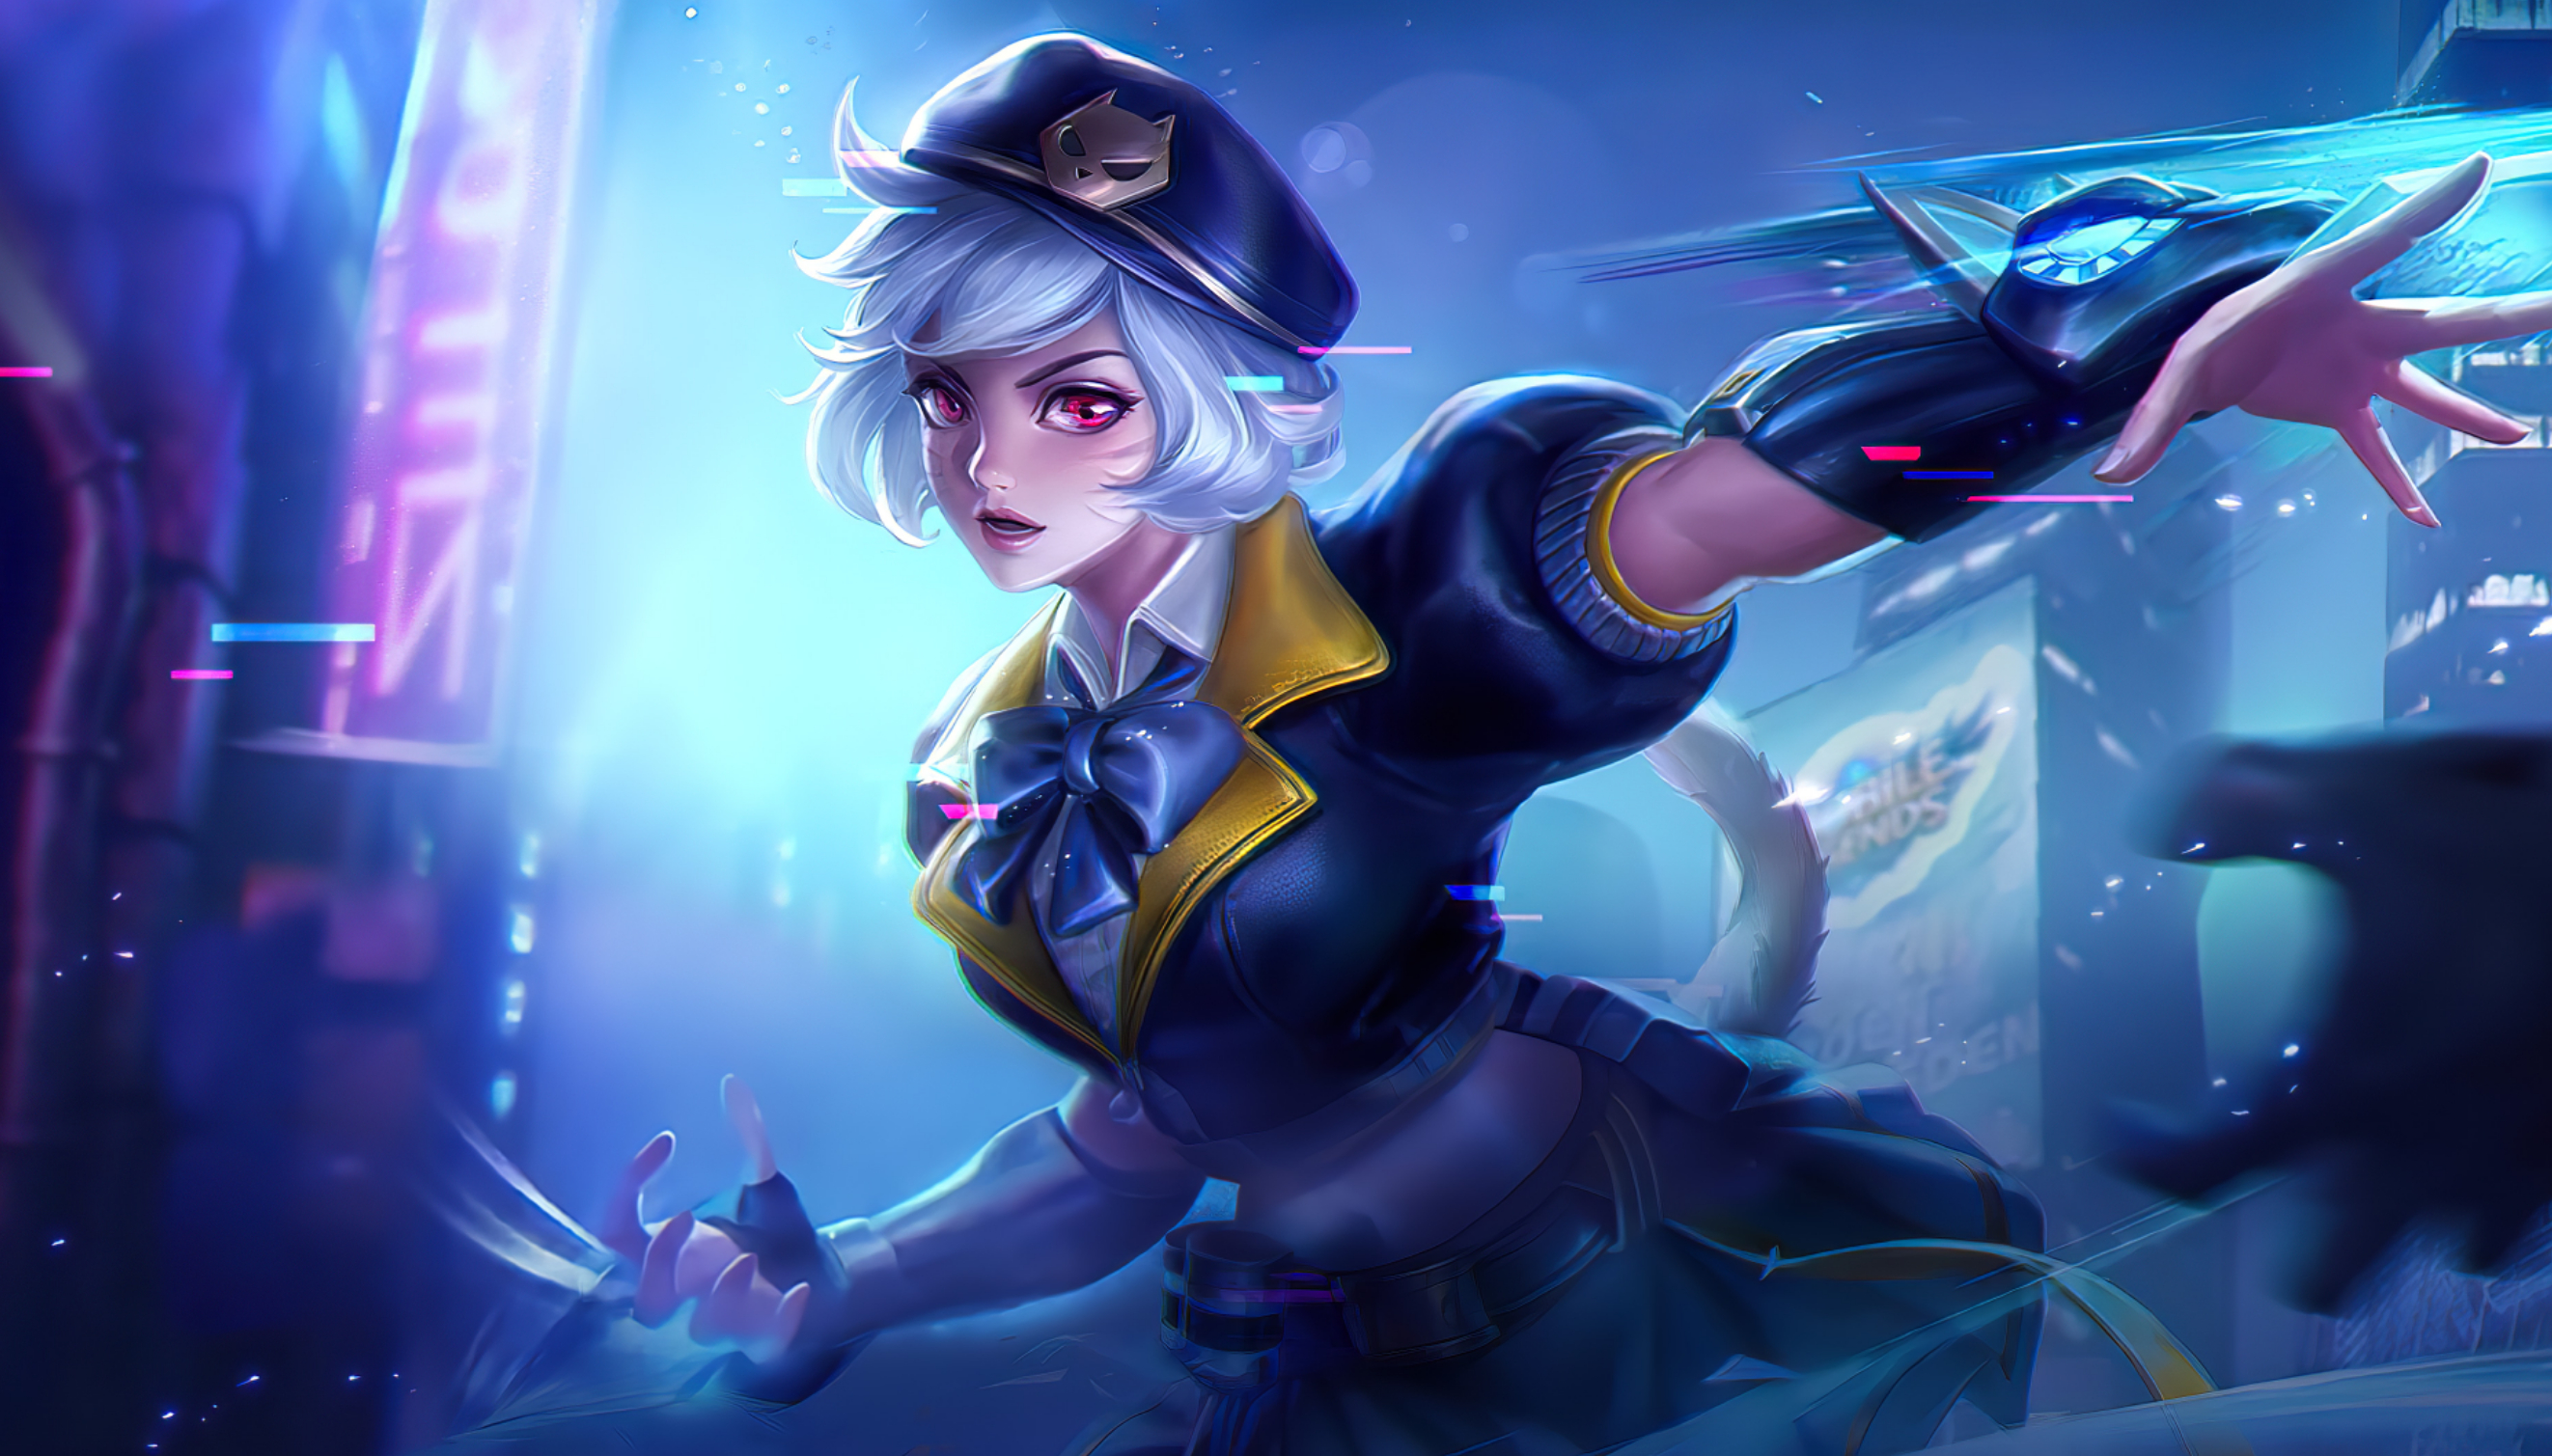 130+ Mobile Legends: Bang Bang HD Wallpapers and Backgrounds